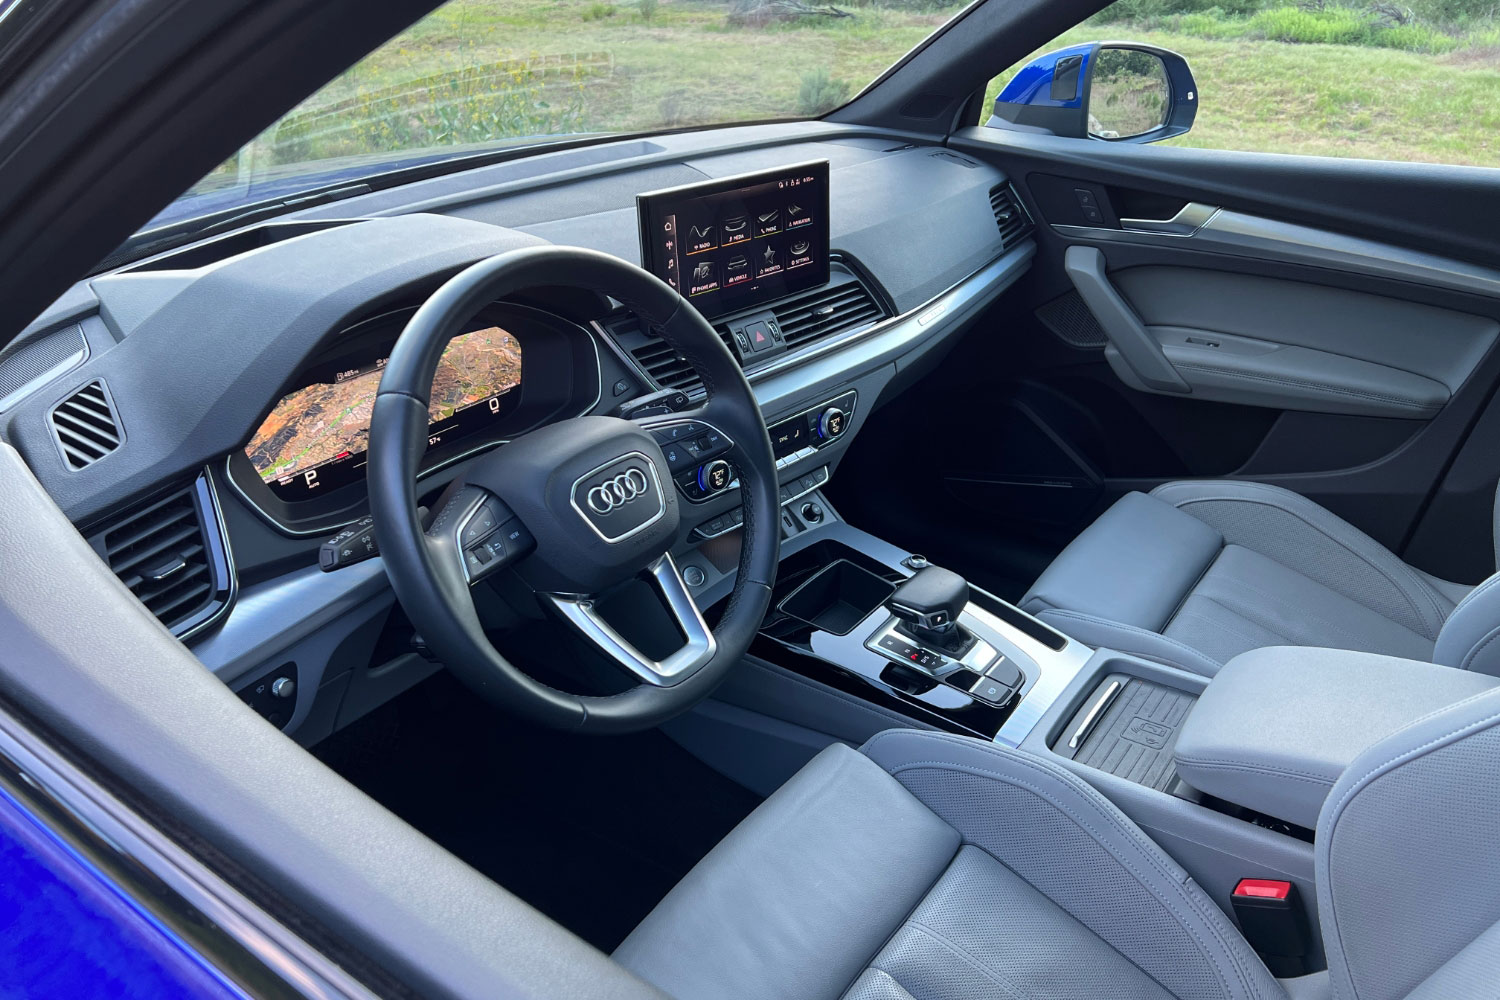 Steering wheel, dashboard, and front seats of an Audi Q5.